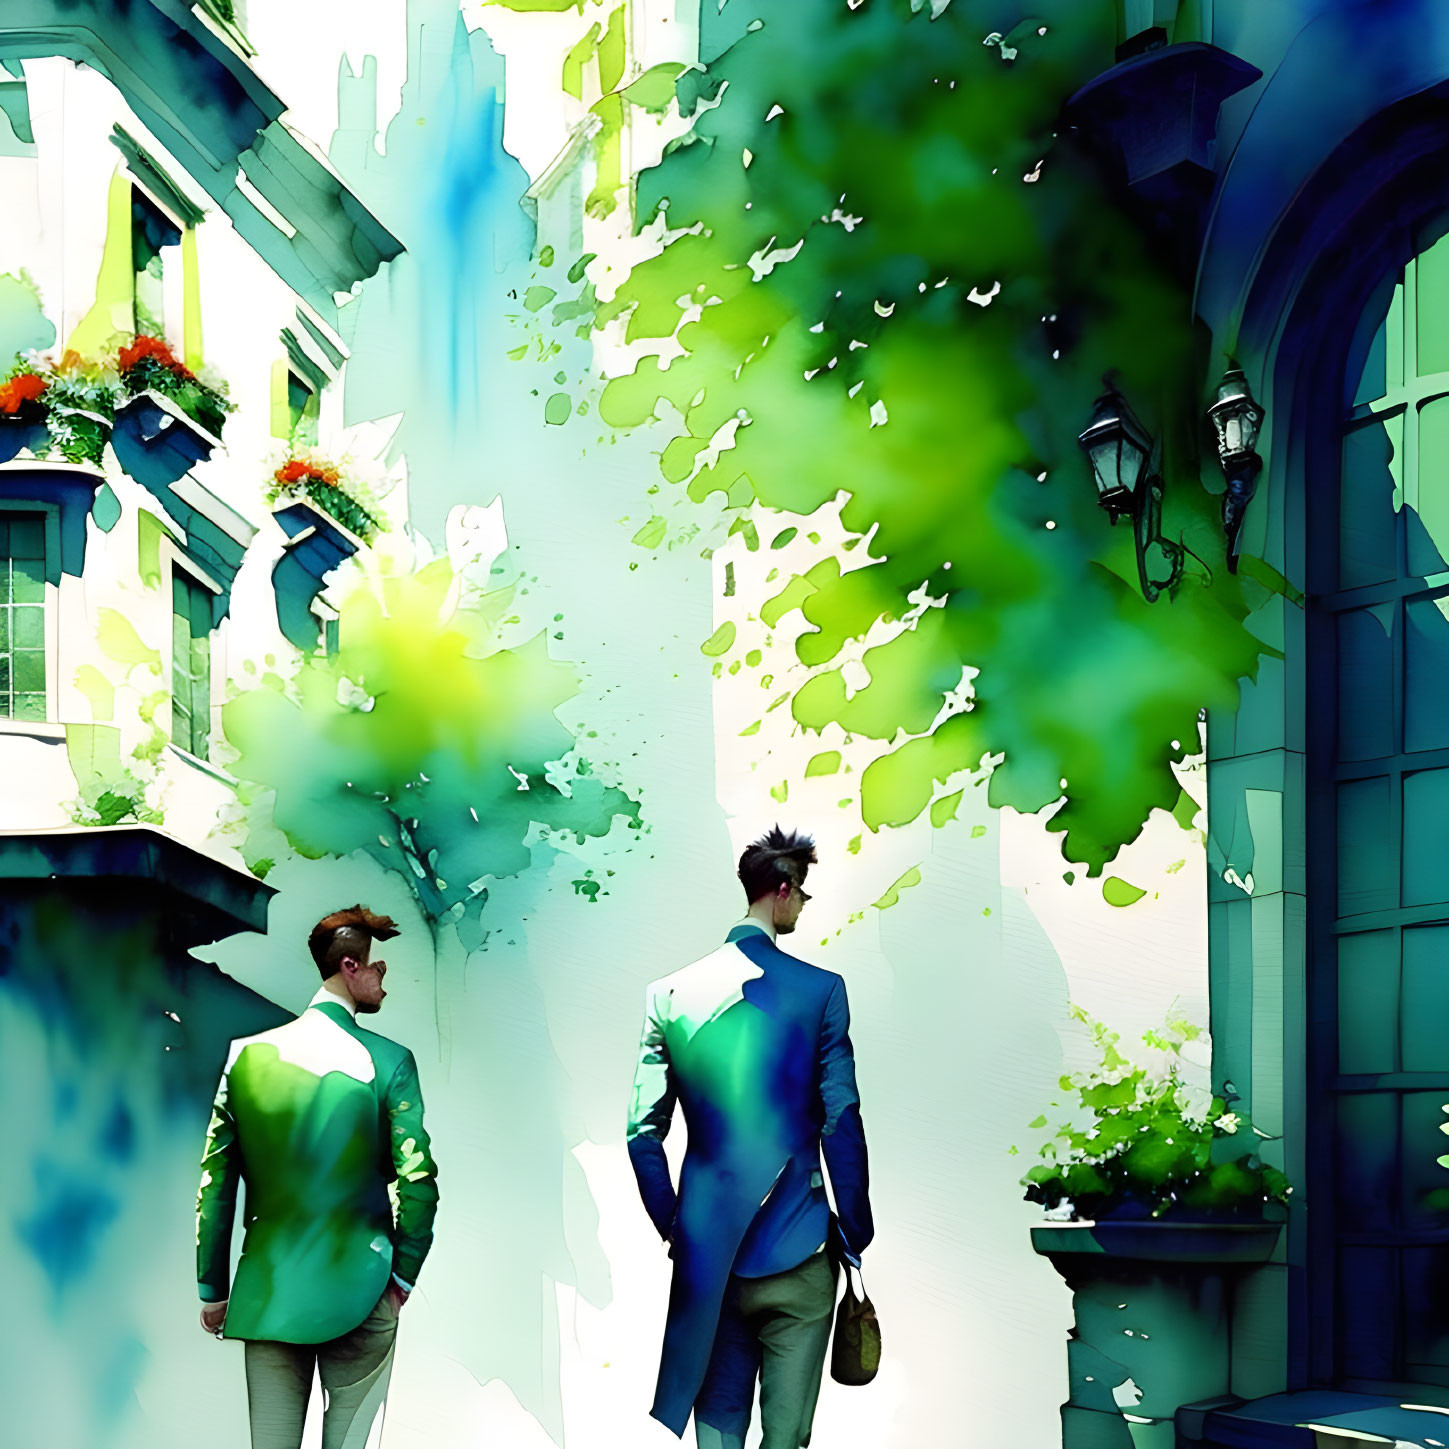 Two people in suits walking in vibrant city street with green foliage and sunlight.